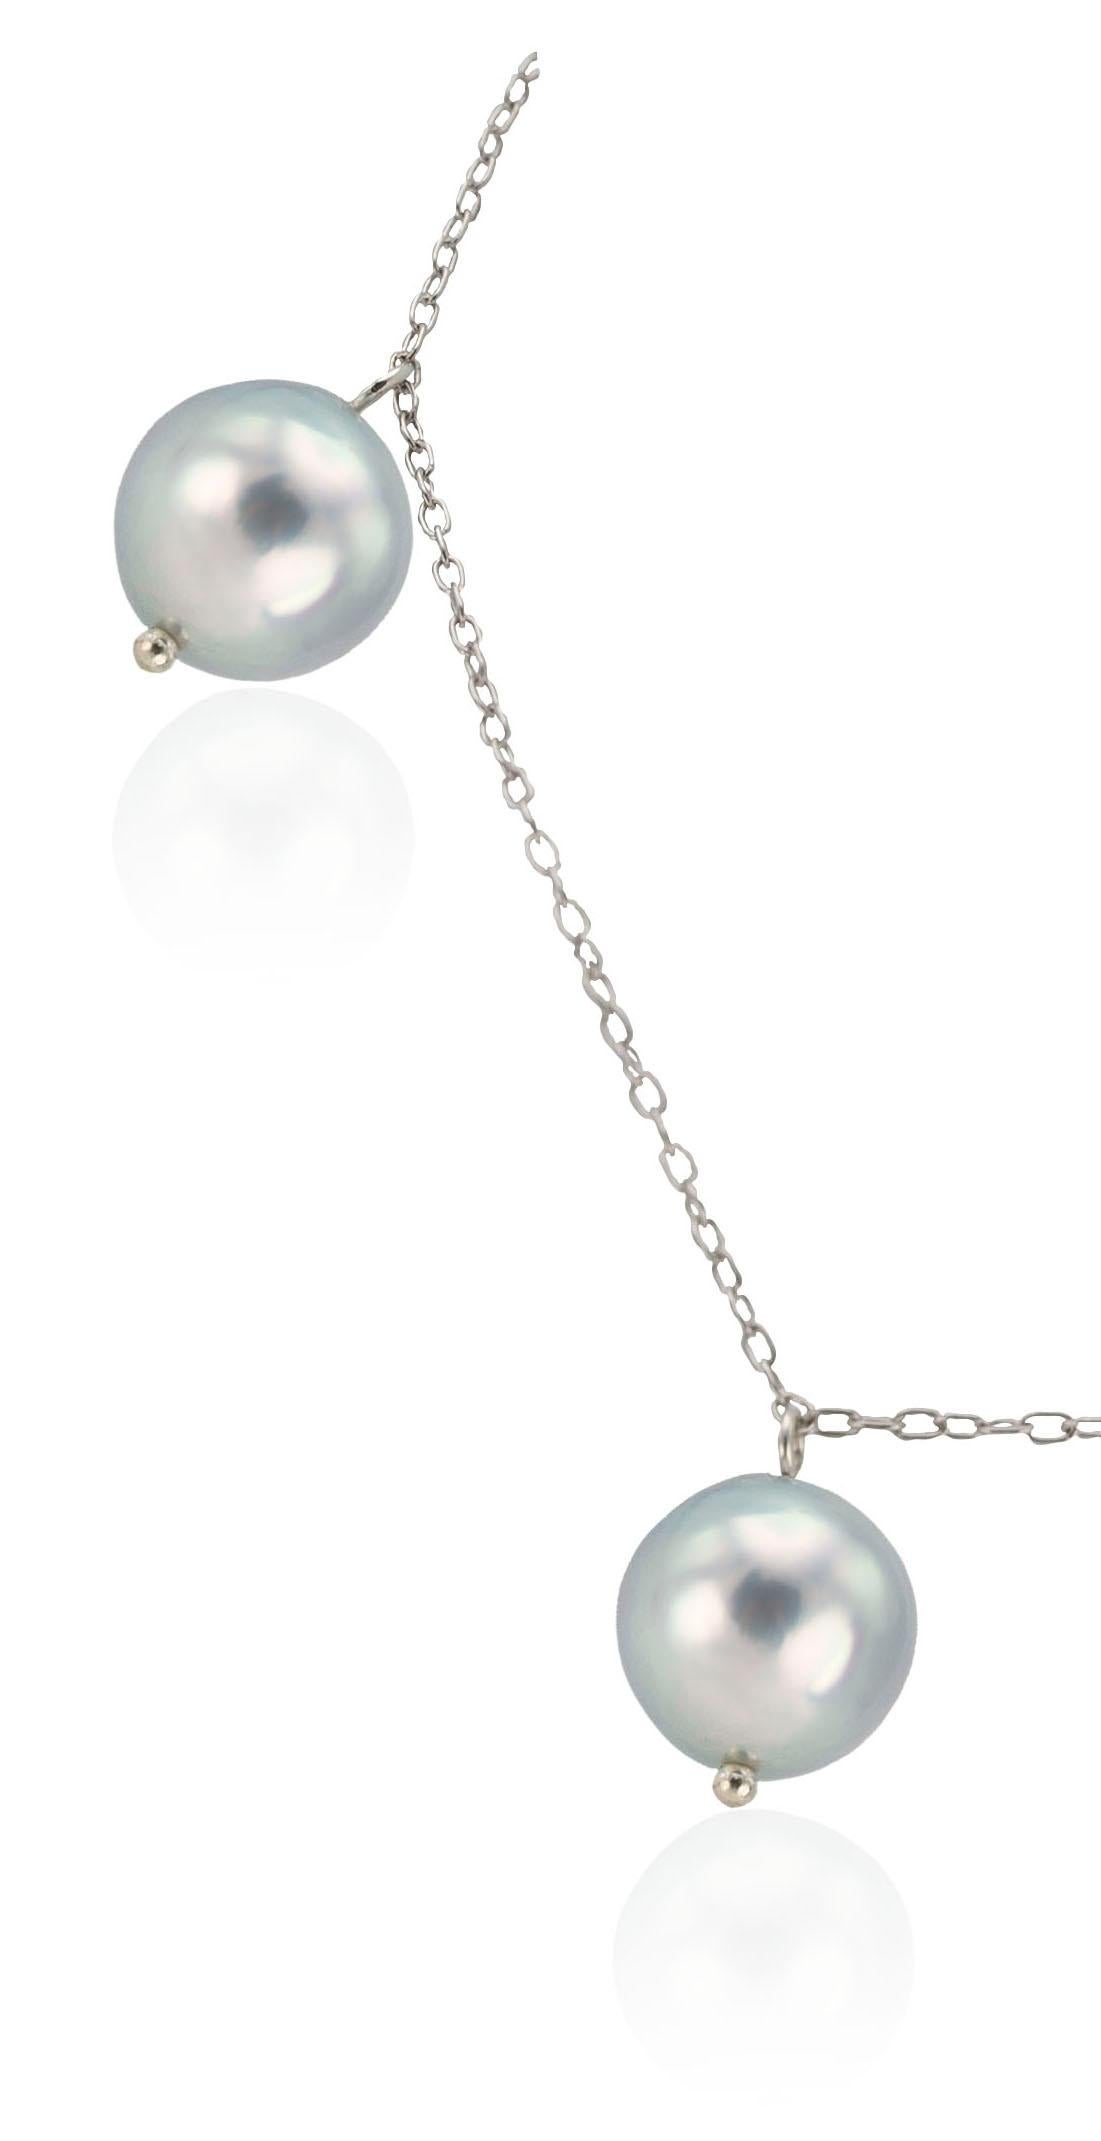 Beautiful Tincup style bracelet with Akoya Blue Baroque Pearls measuring 7.5-8mm and .925 Sterling Silver chain. The bracelet is adjustable 7-8